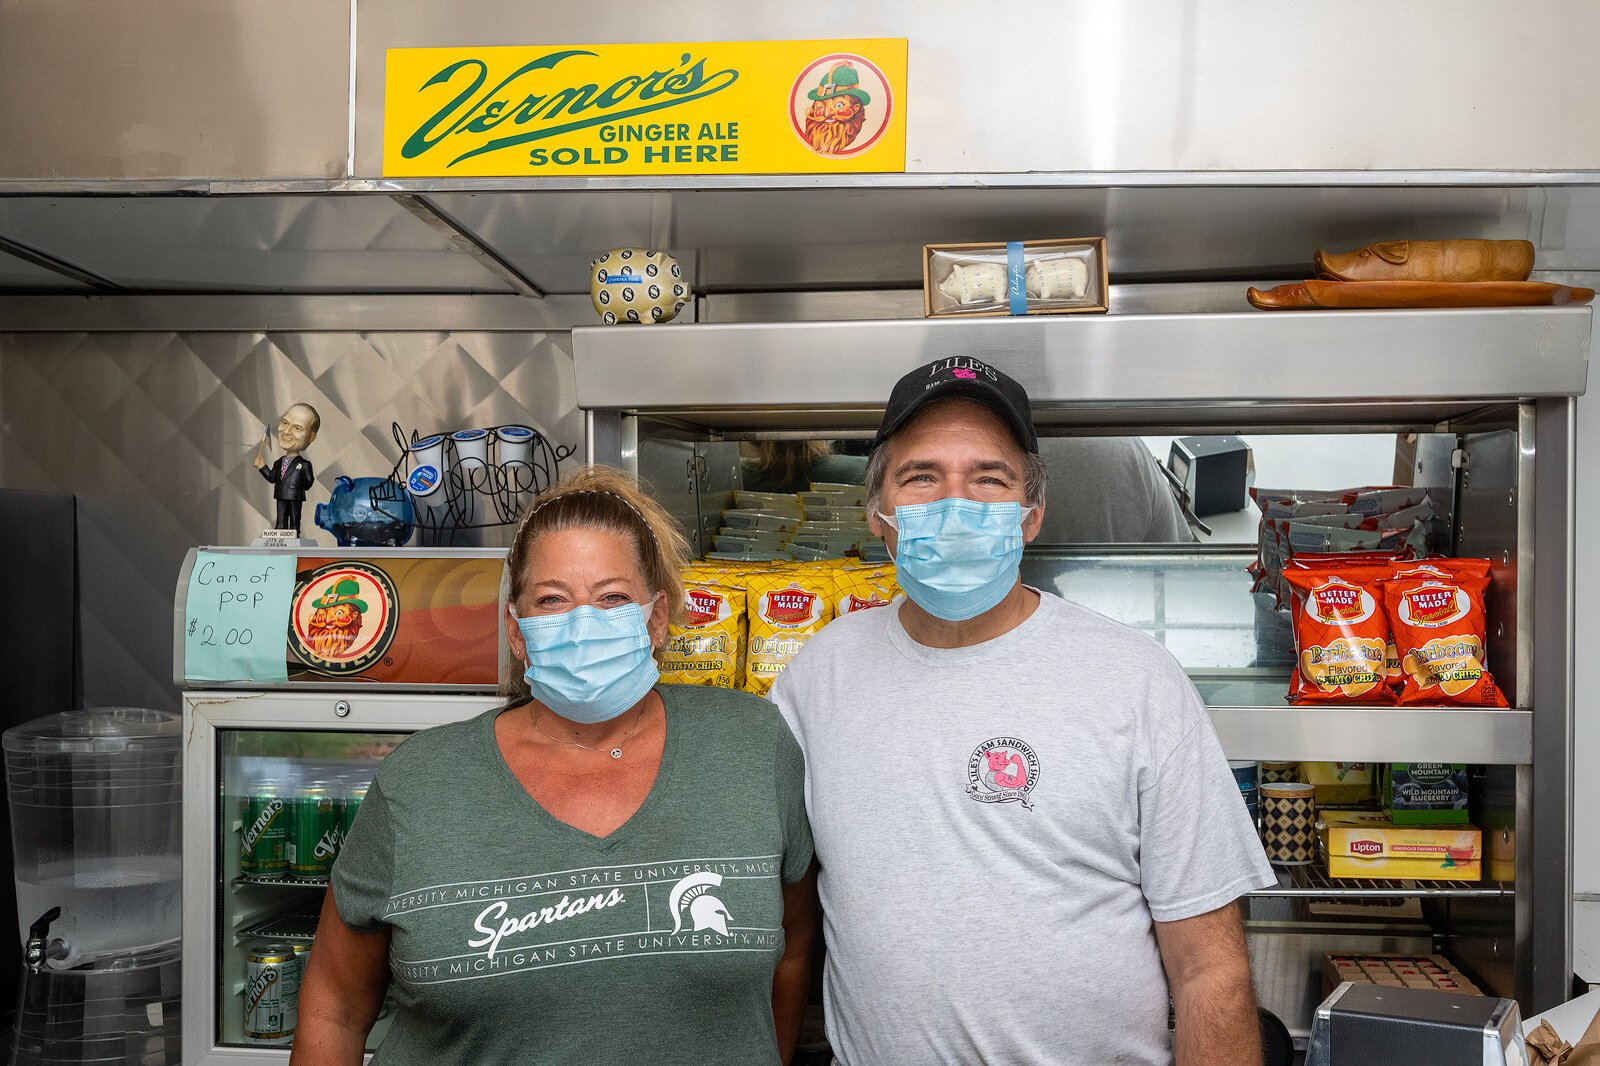 Kim Ruffino, Harry Lile at Lile's Sandwich shop in Dearborn. Photo by Doug Coombe.